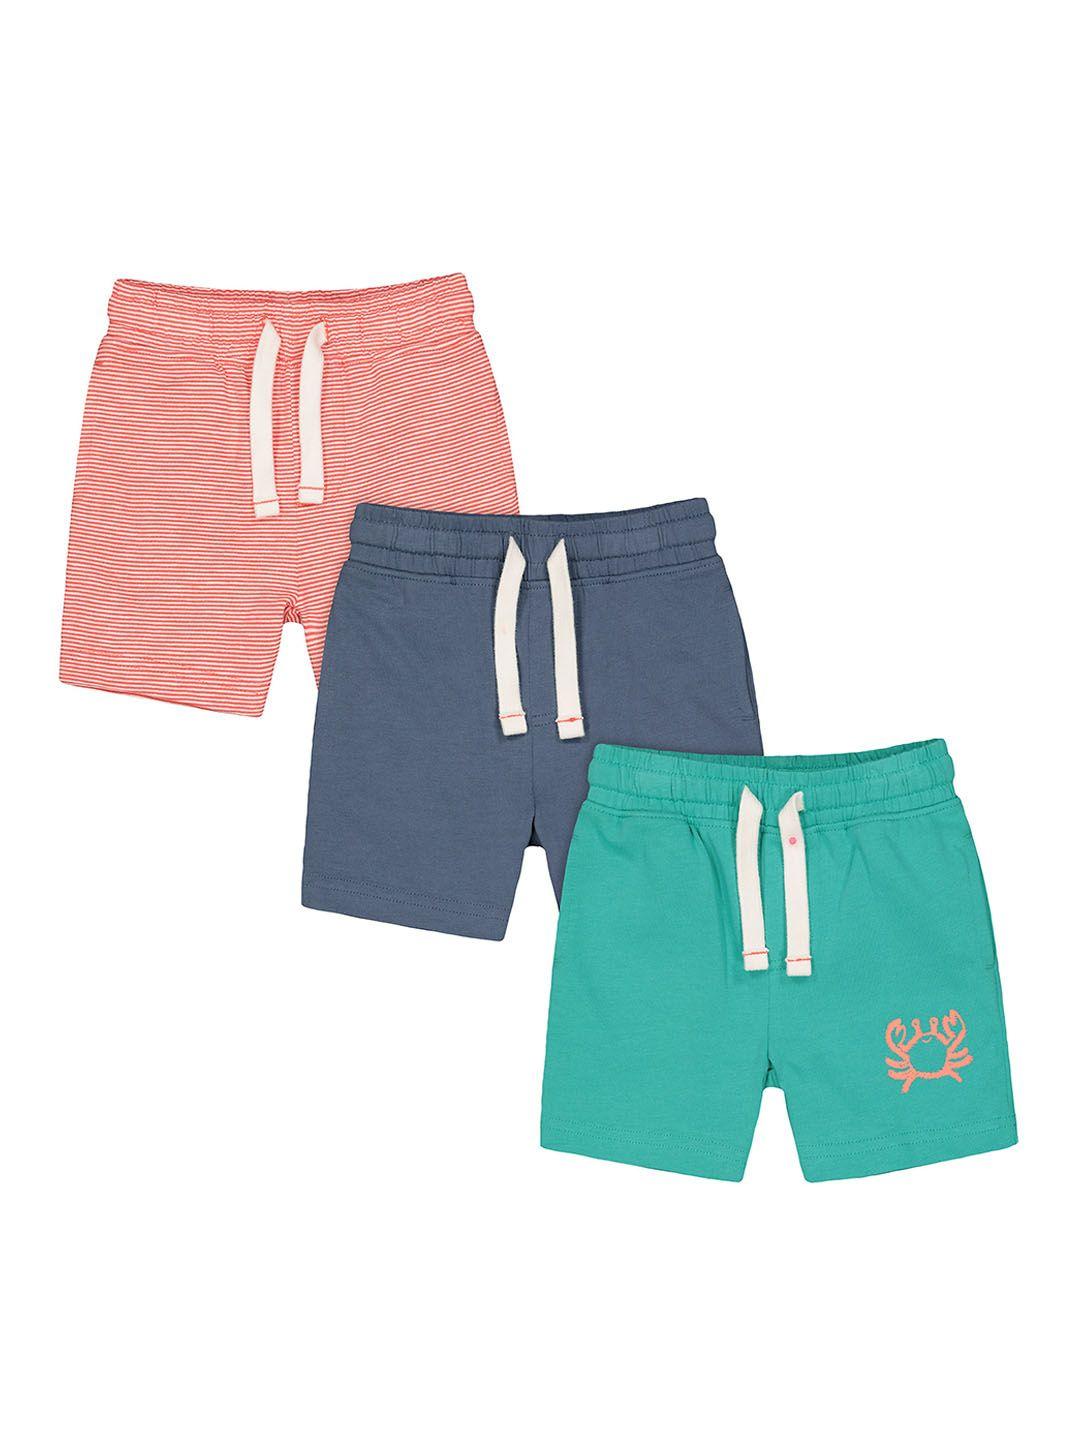 mothercare boys pack of 3 pure cotton shorts